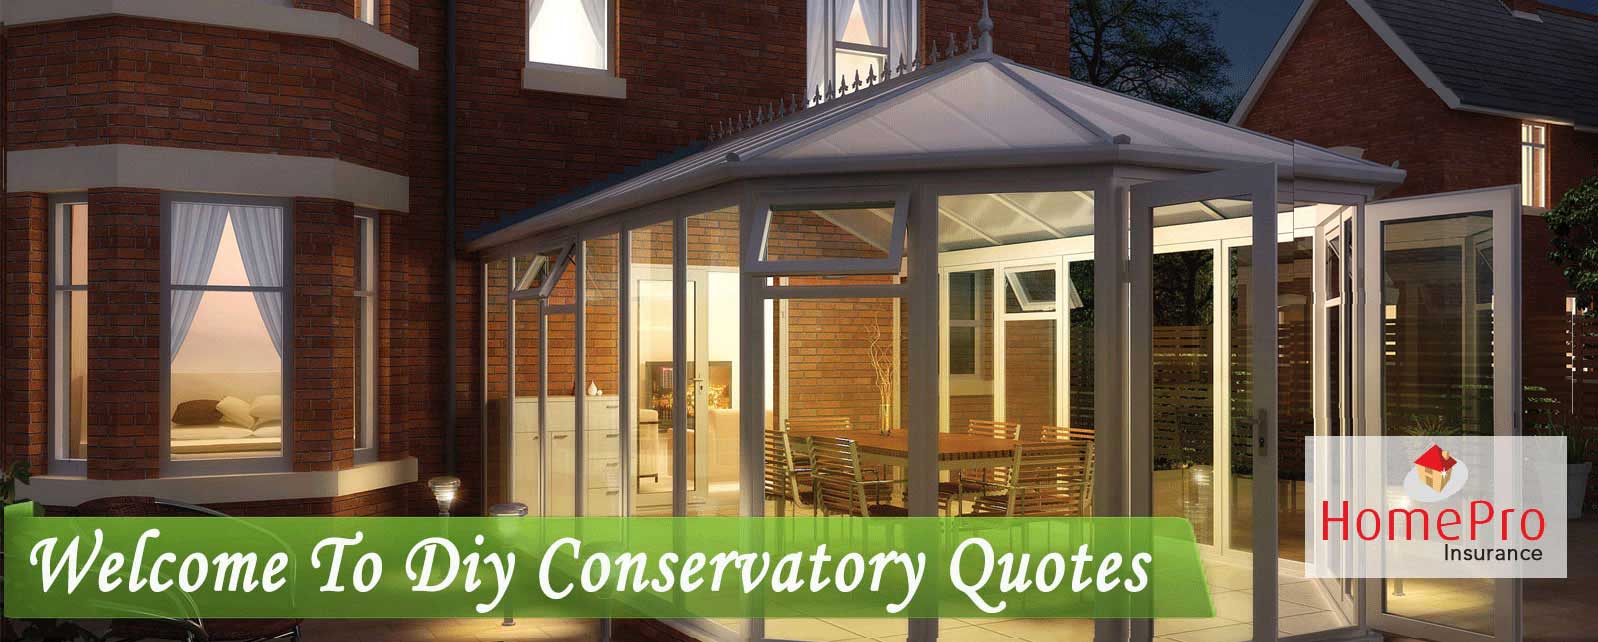 diy conservatory quotes